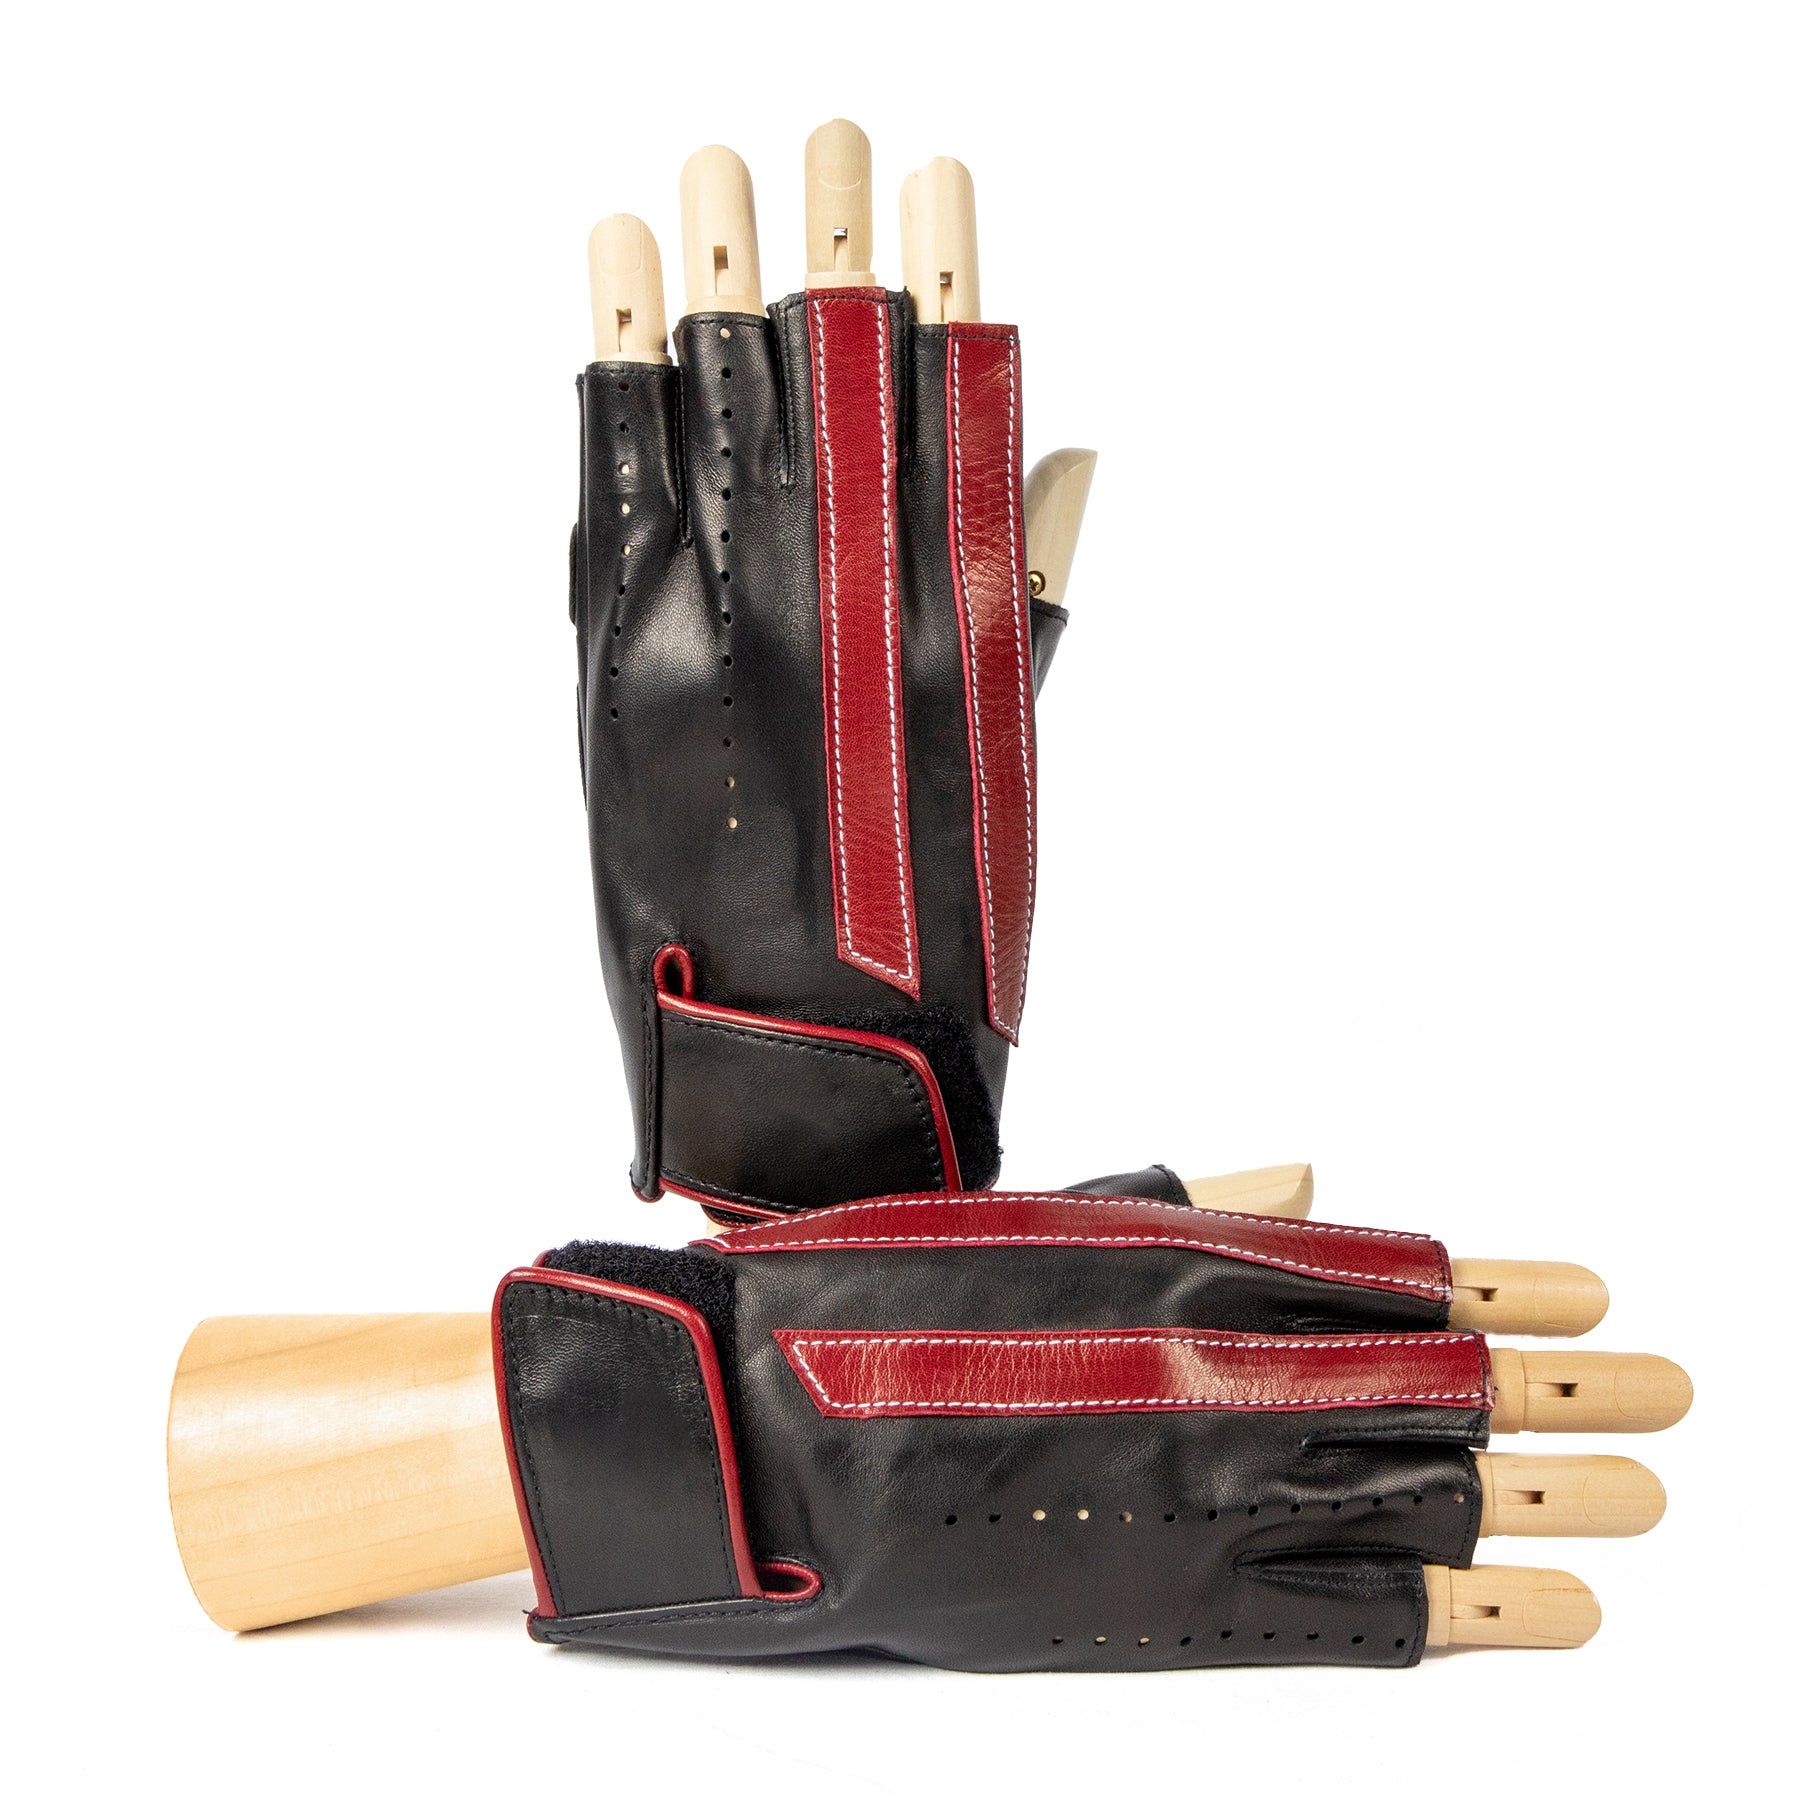 Men's unlined half fingers driving gloves in black nappa leather with red leather strips